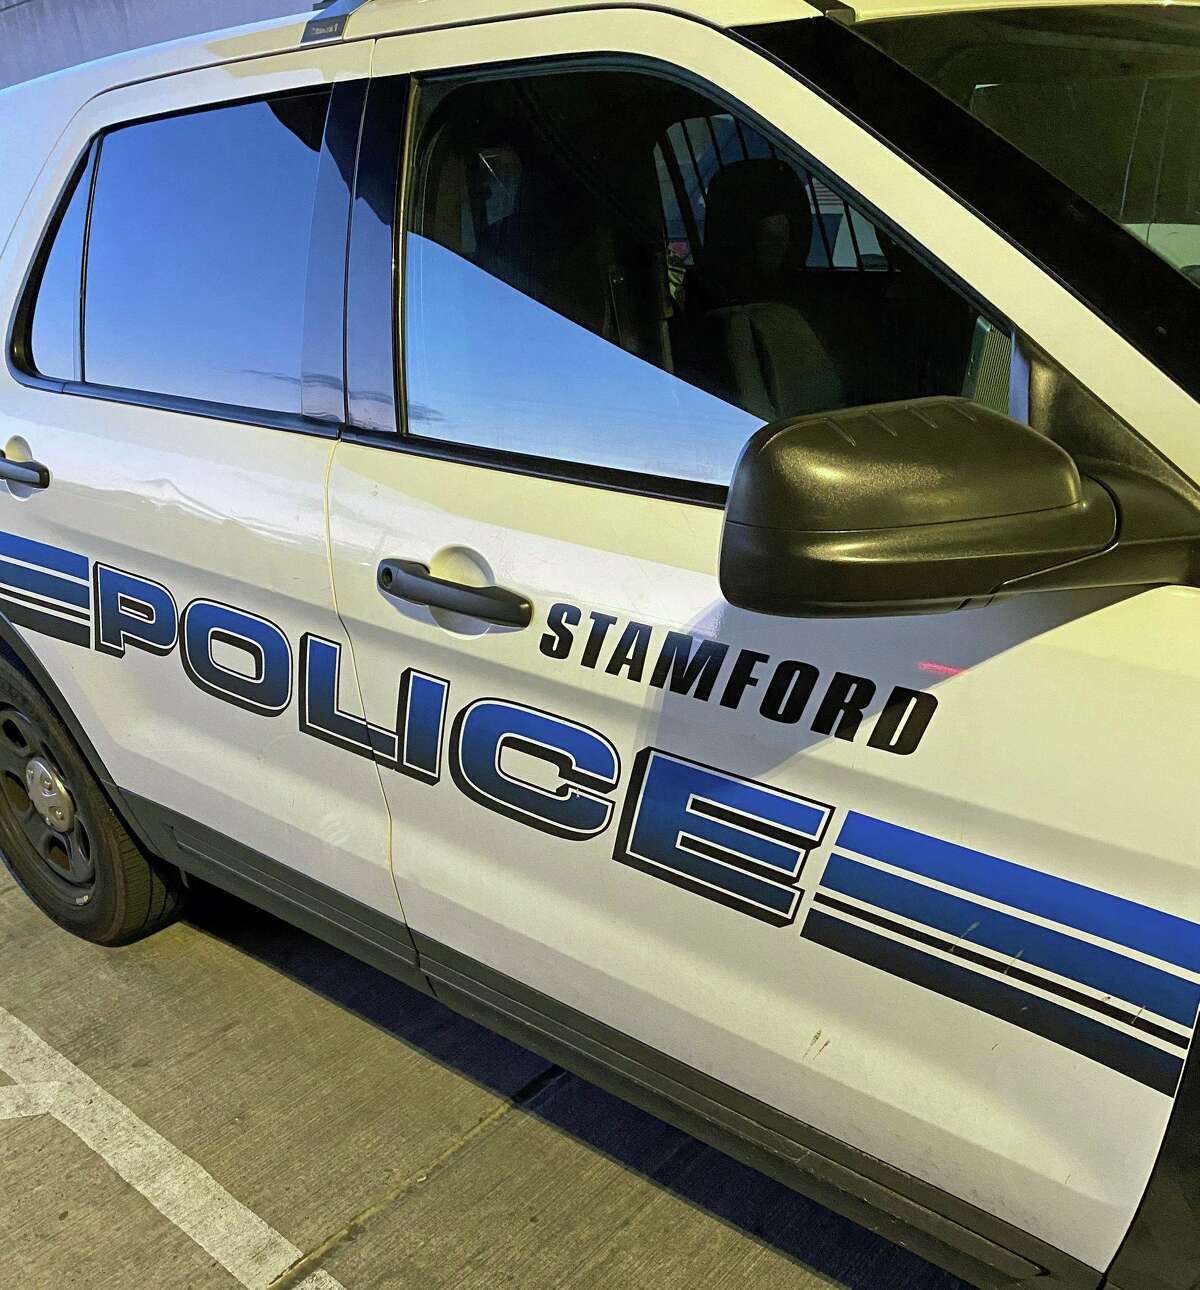 Authorities say investigators continue to search for the driver involved in a serious hit-and-run of a pedestrian Wednesday, April 13, 2022, in Stamford, Conn.